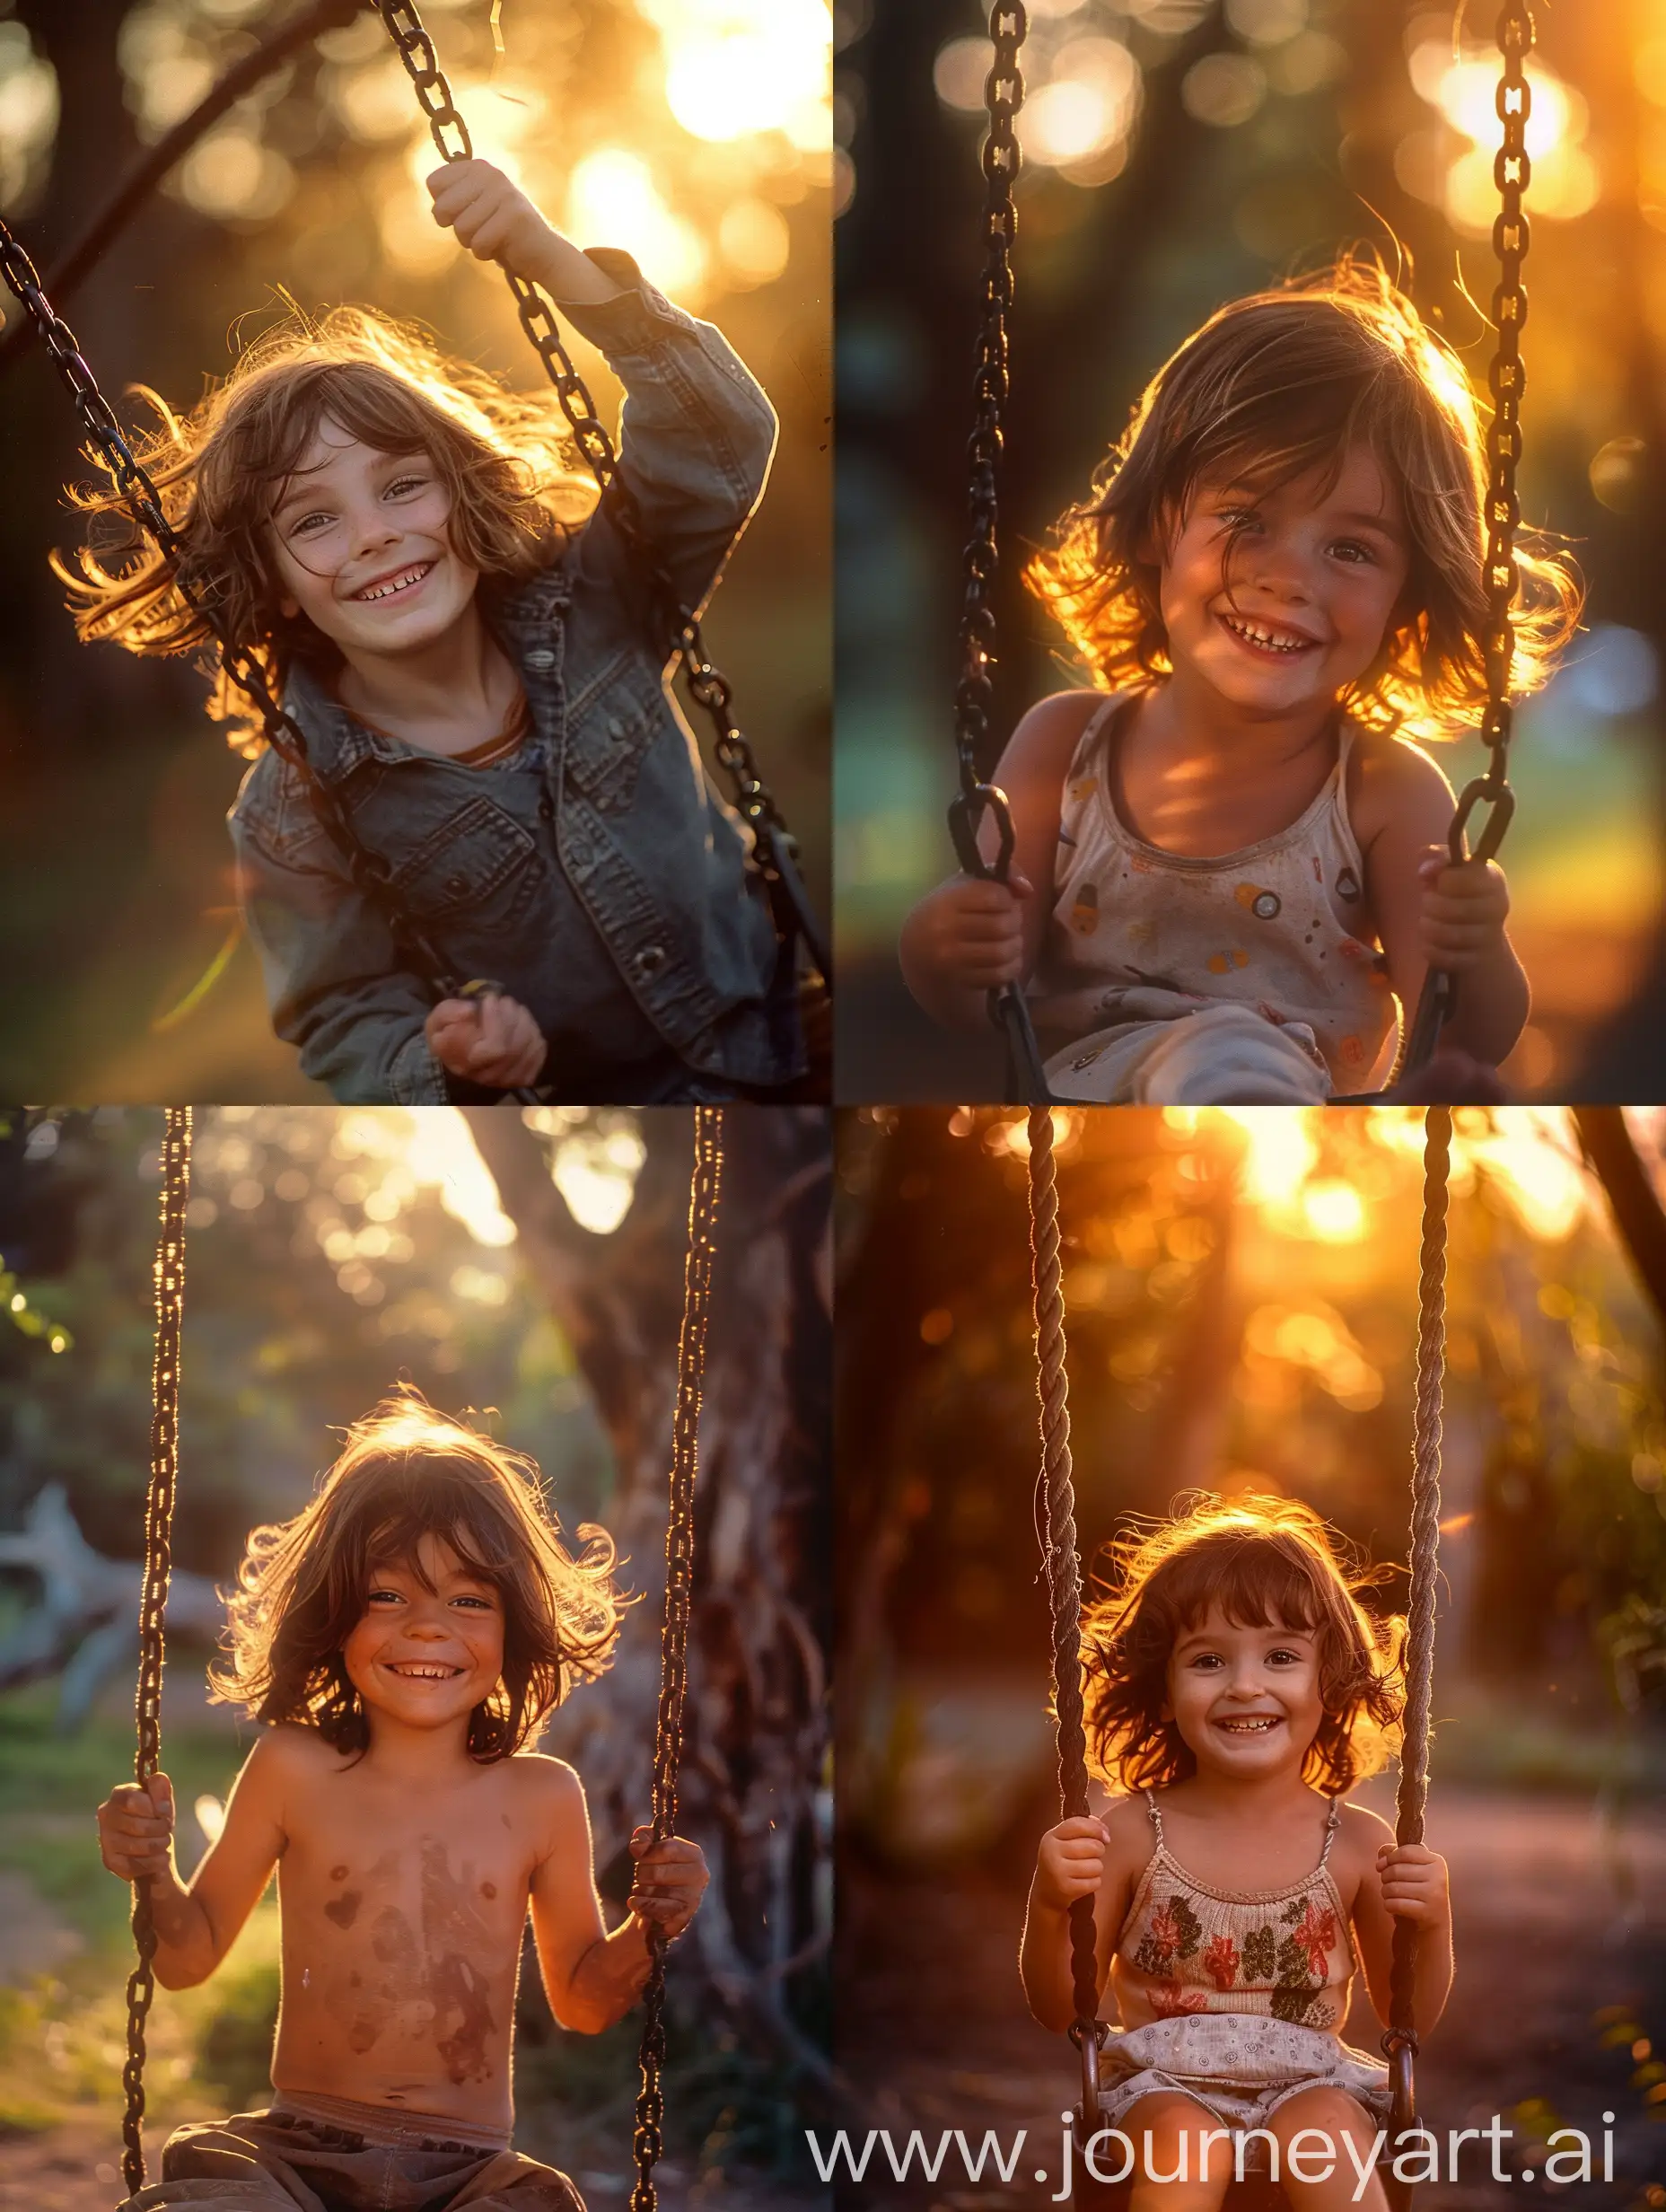 Cheerful-Child-with-Brown-Hair-Swinging-at-Sunset-in-Park